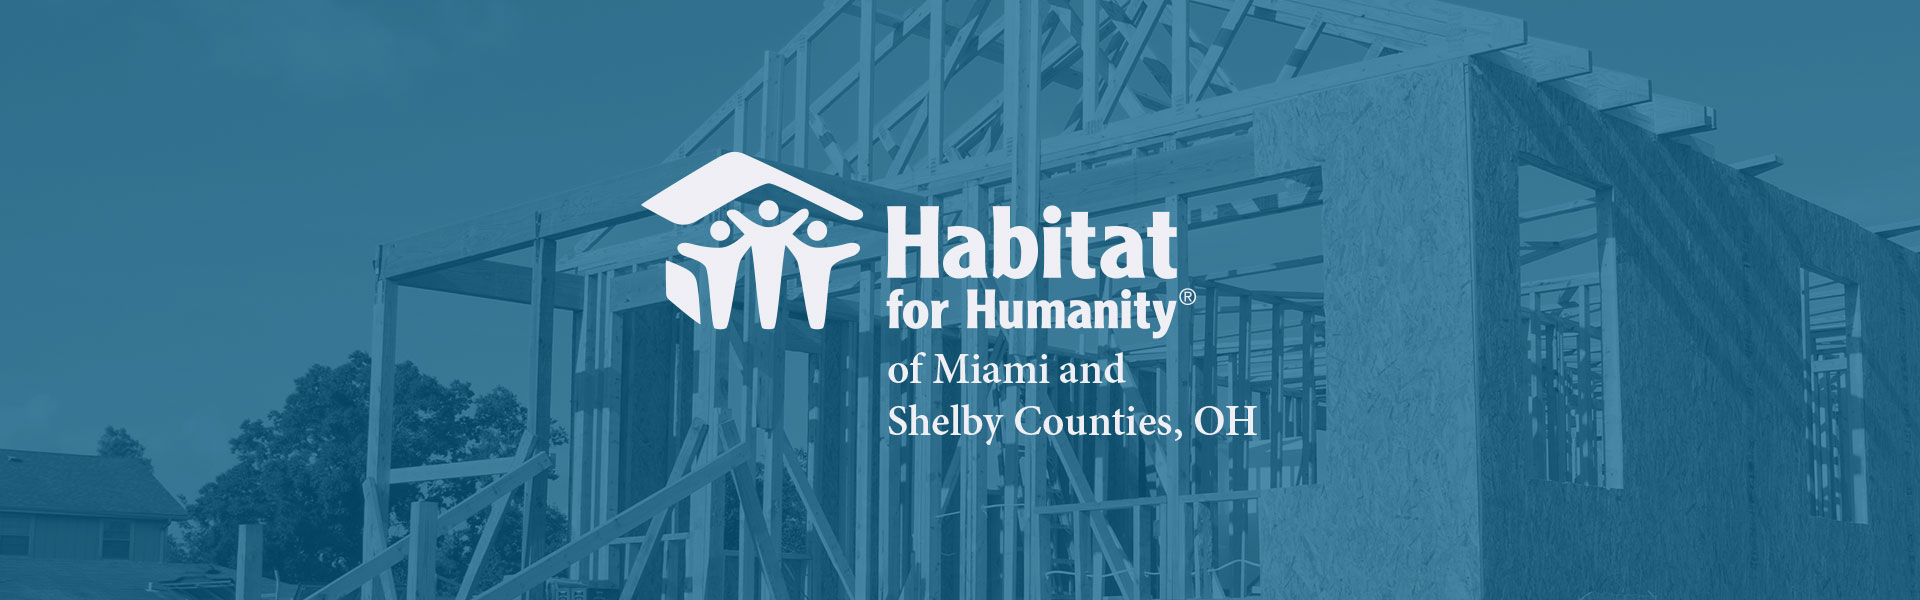 Habitat for Humanity of Miami and Shelby Counties, OH